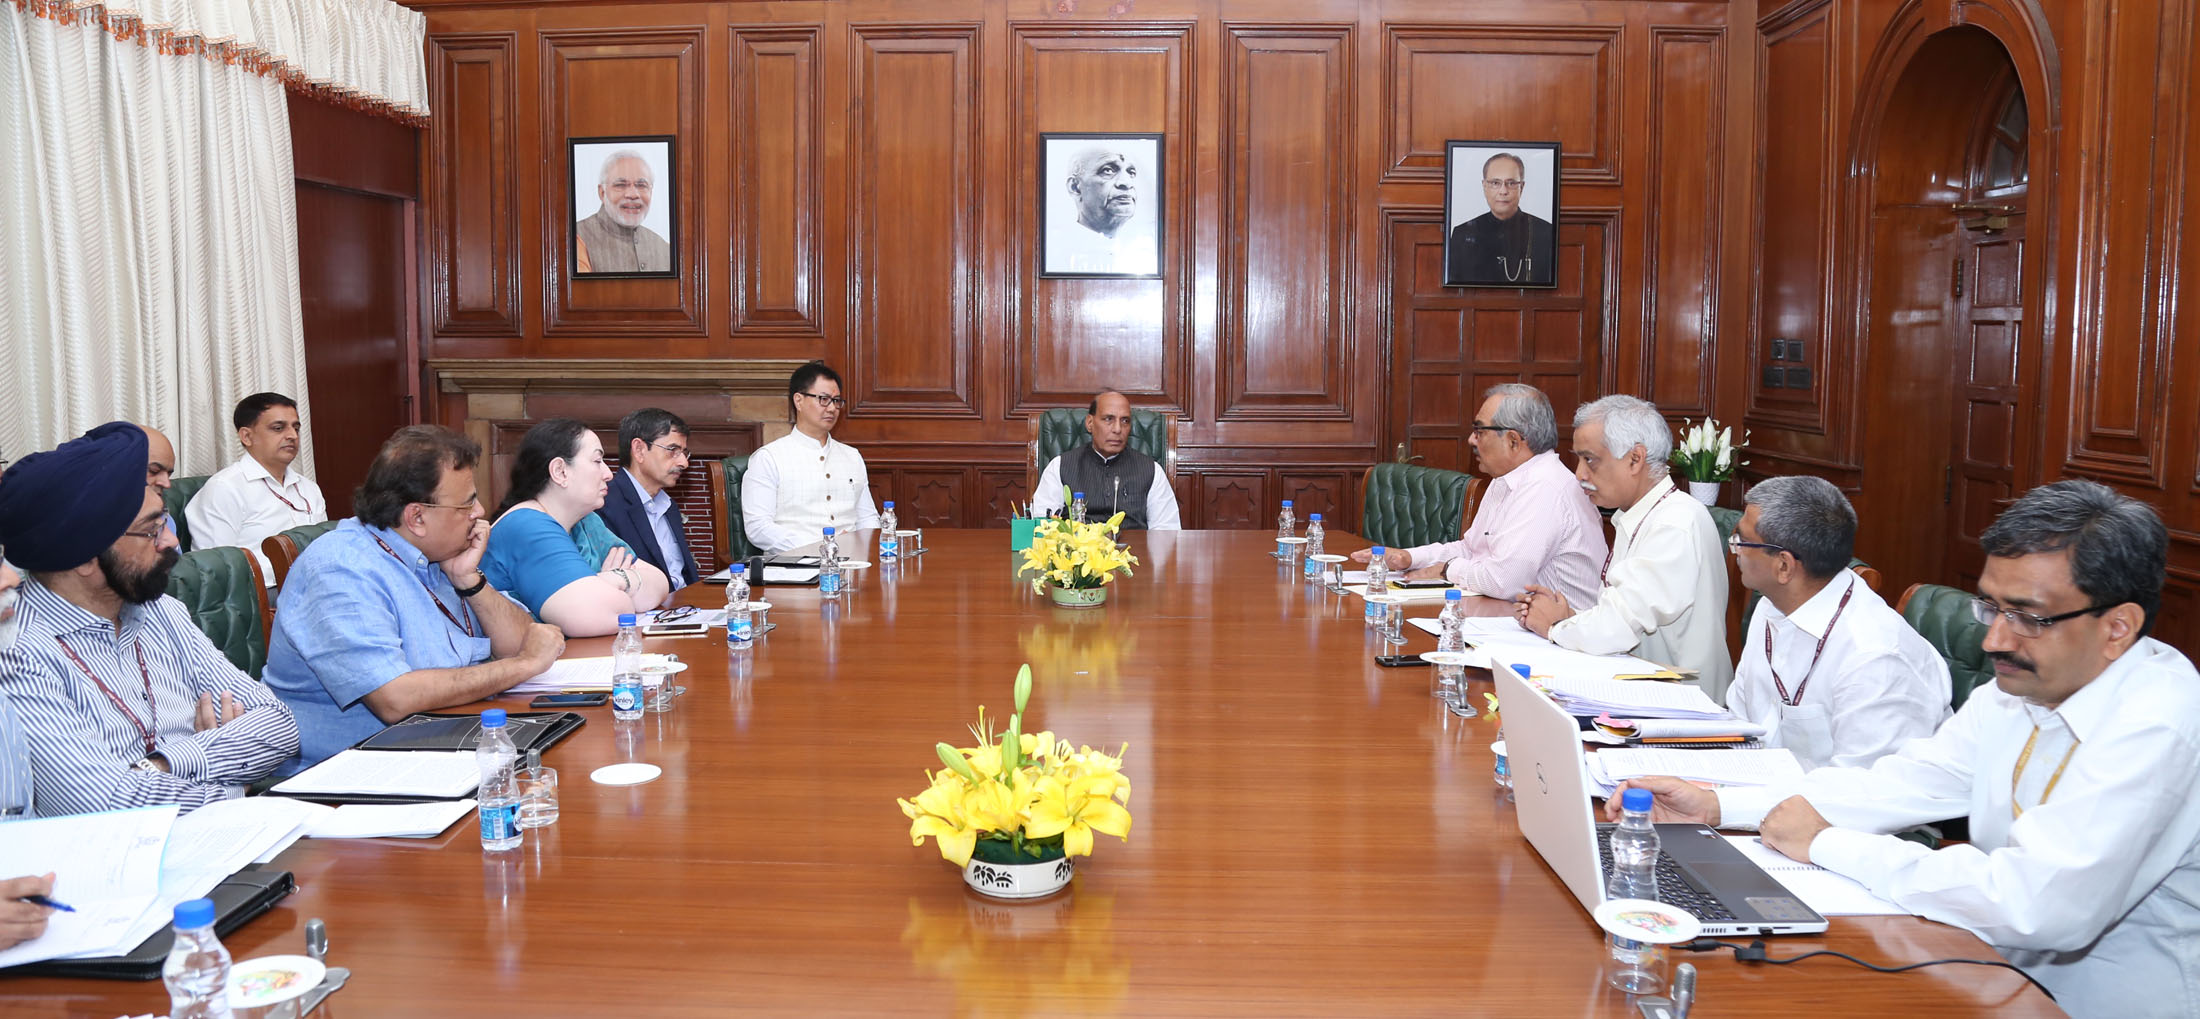 The Union Home Minister, Shri Rajnath Singh chairing a meeting to review the situation in North East, in New Delhi on March 24, 2017. 	The Minister of State for Home Affairs, Shri Kiren Rijiju and senior officers of MHA are also seen.